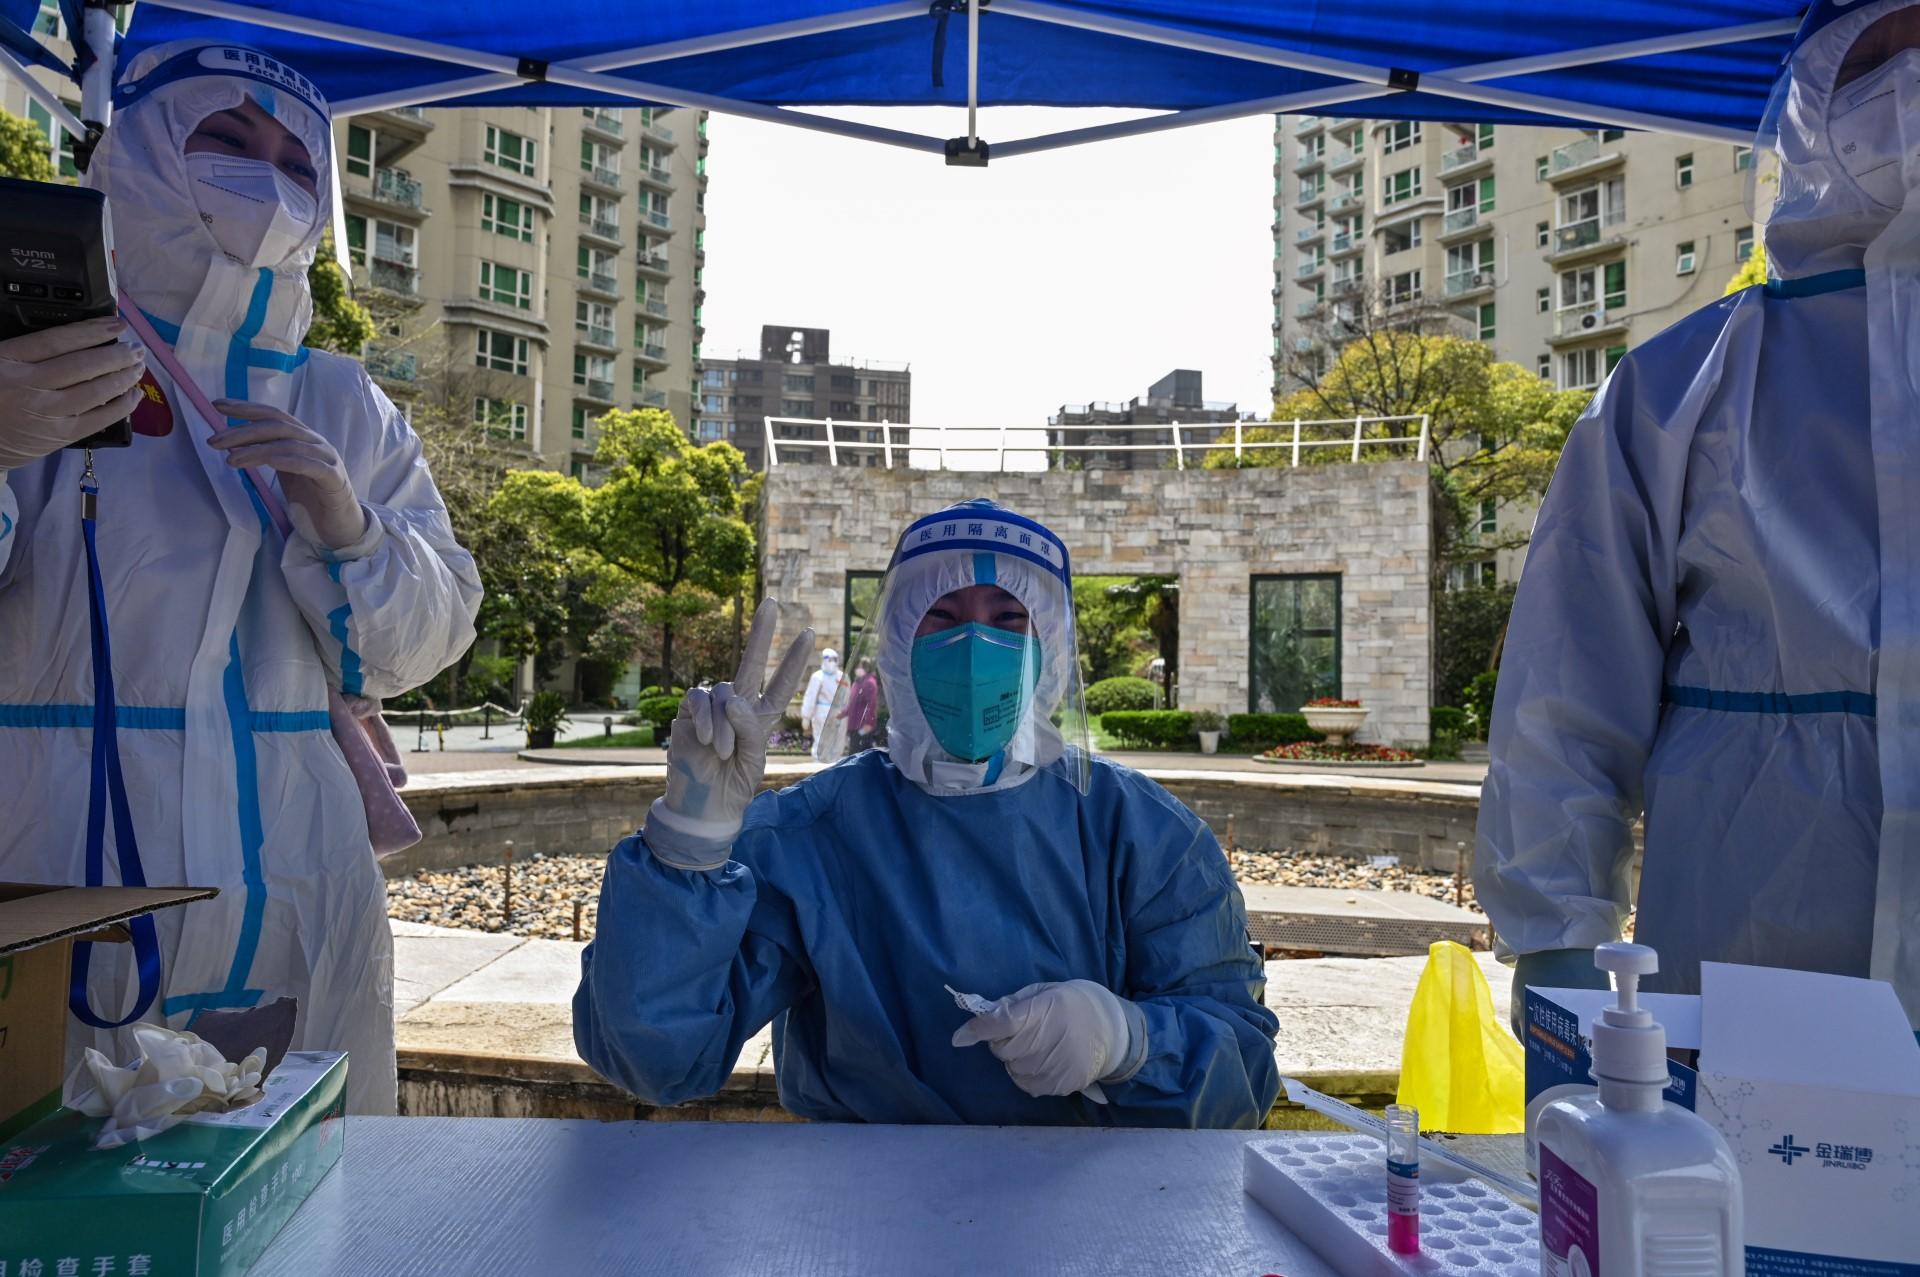 A health worker gestures while preparing to conduct a swab test at a residential compound during the second stage of a Covid-19 lockdown in Jing'an district in Shanghai on April 1. Photo: AFP